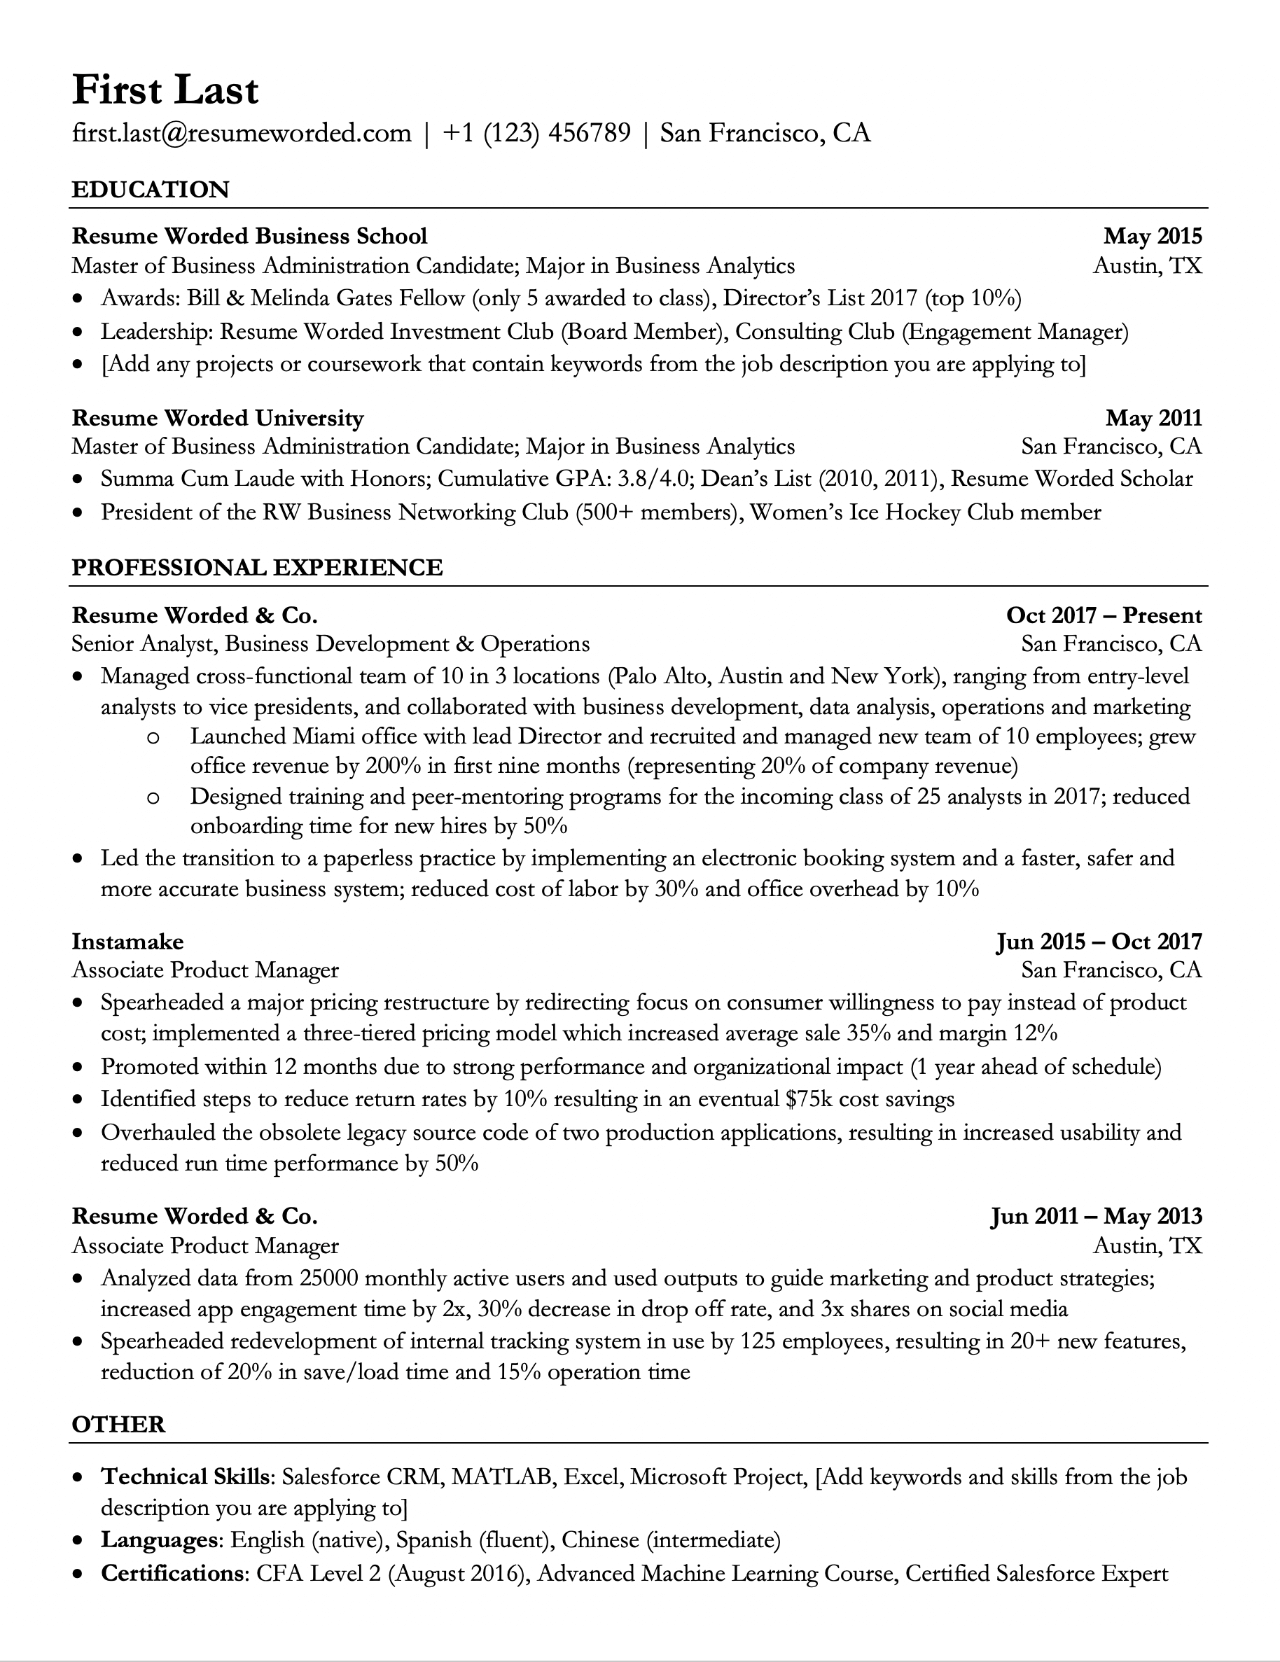 experience resume for graphic designer   21